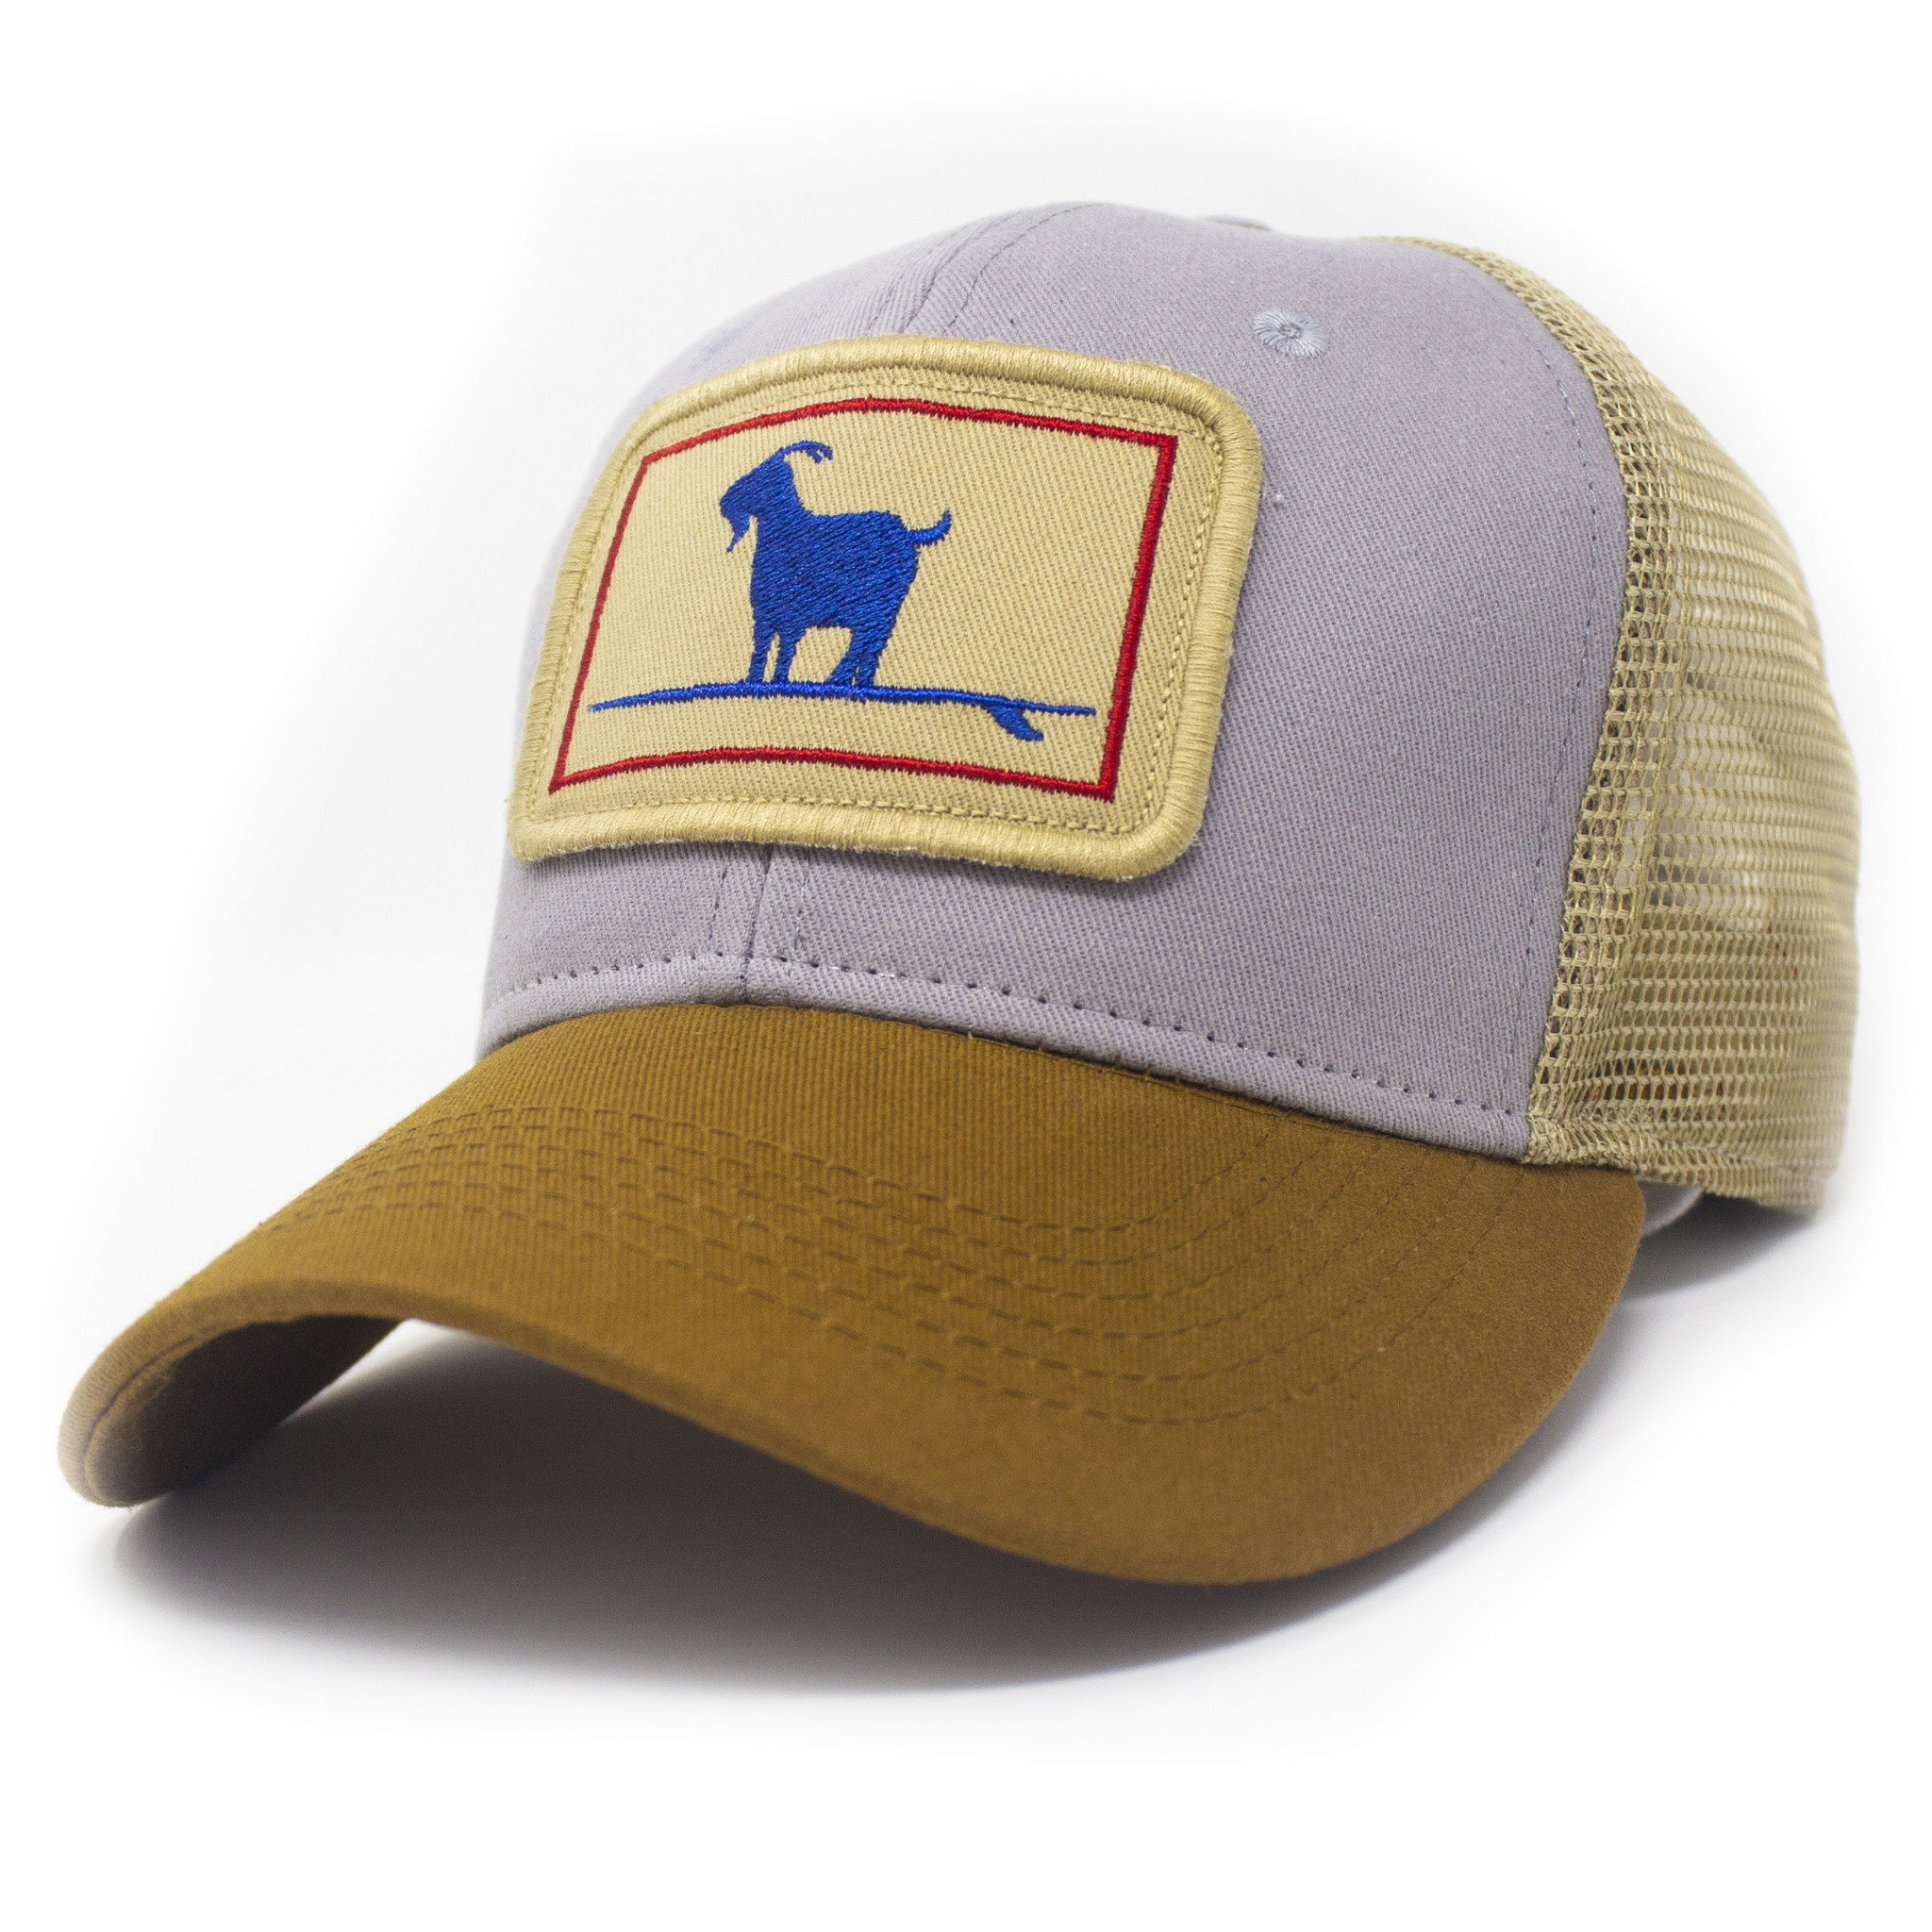 Surfing Goat Everyday Trucker Hat, Structured, Grey and Earth-1